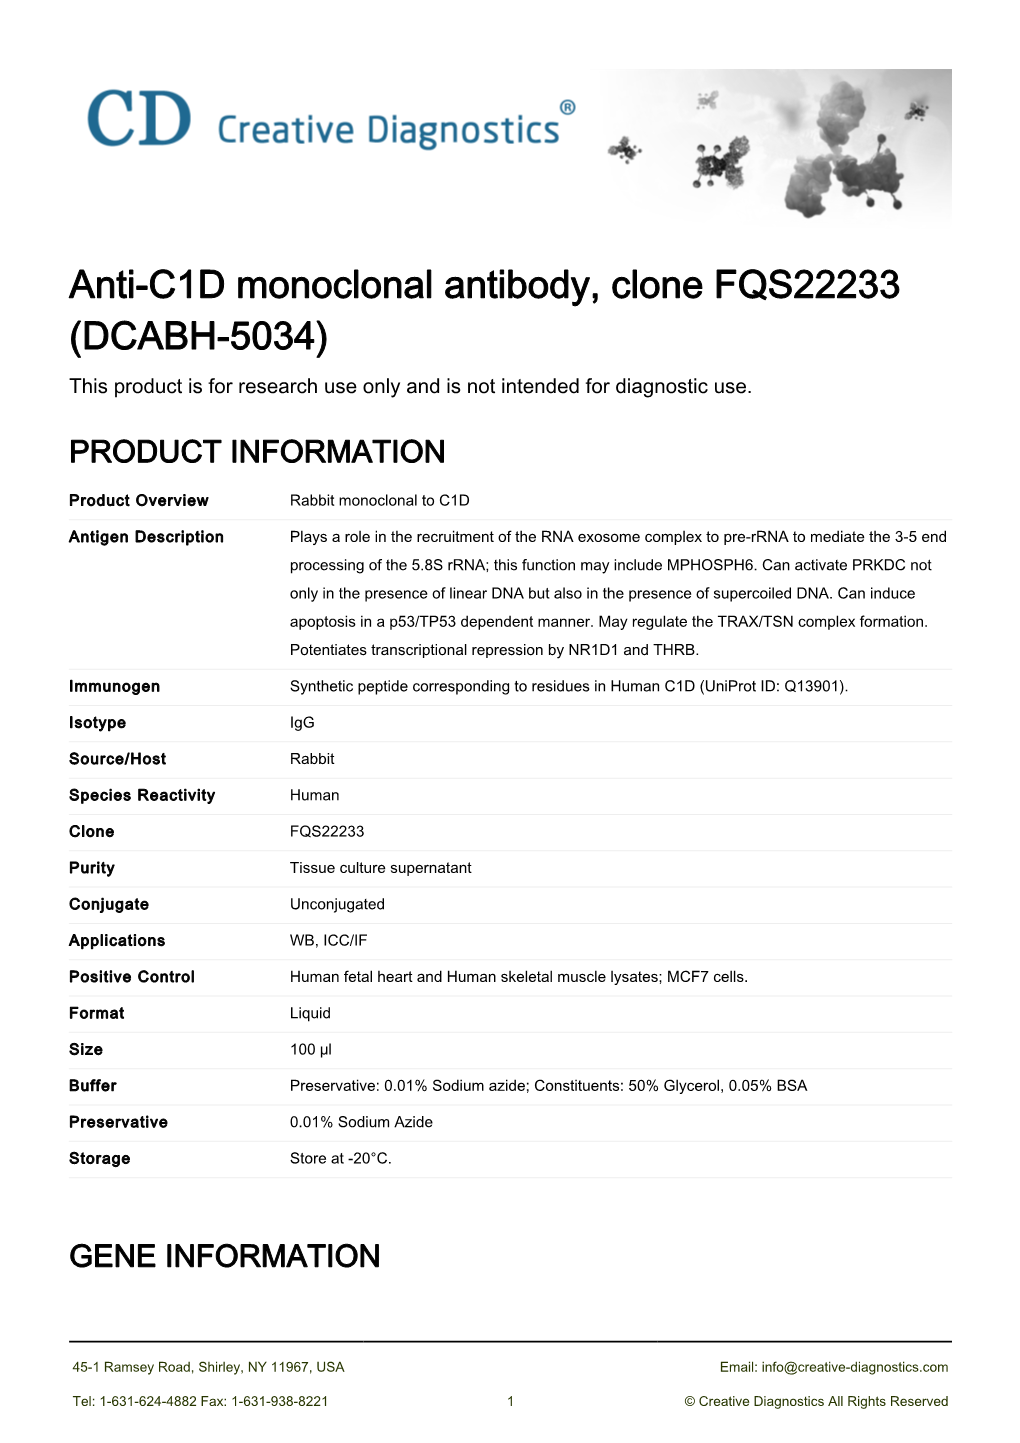 Anti-C1D Monoclonal Antibody, Clone FQS22233 (DCABH-5034) This Product Is for Research Use Only and Is Not Intended for Diagnostic Use